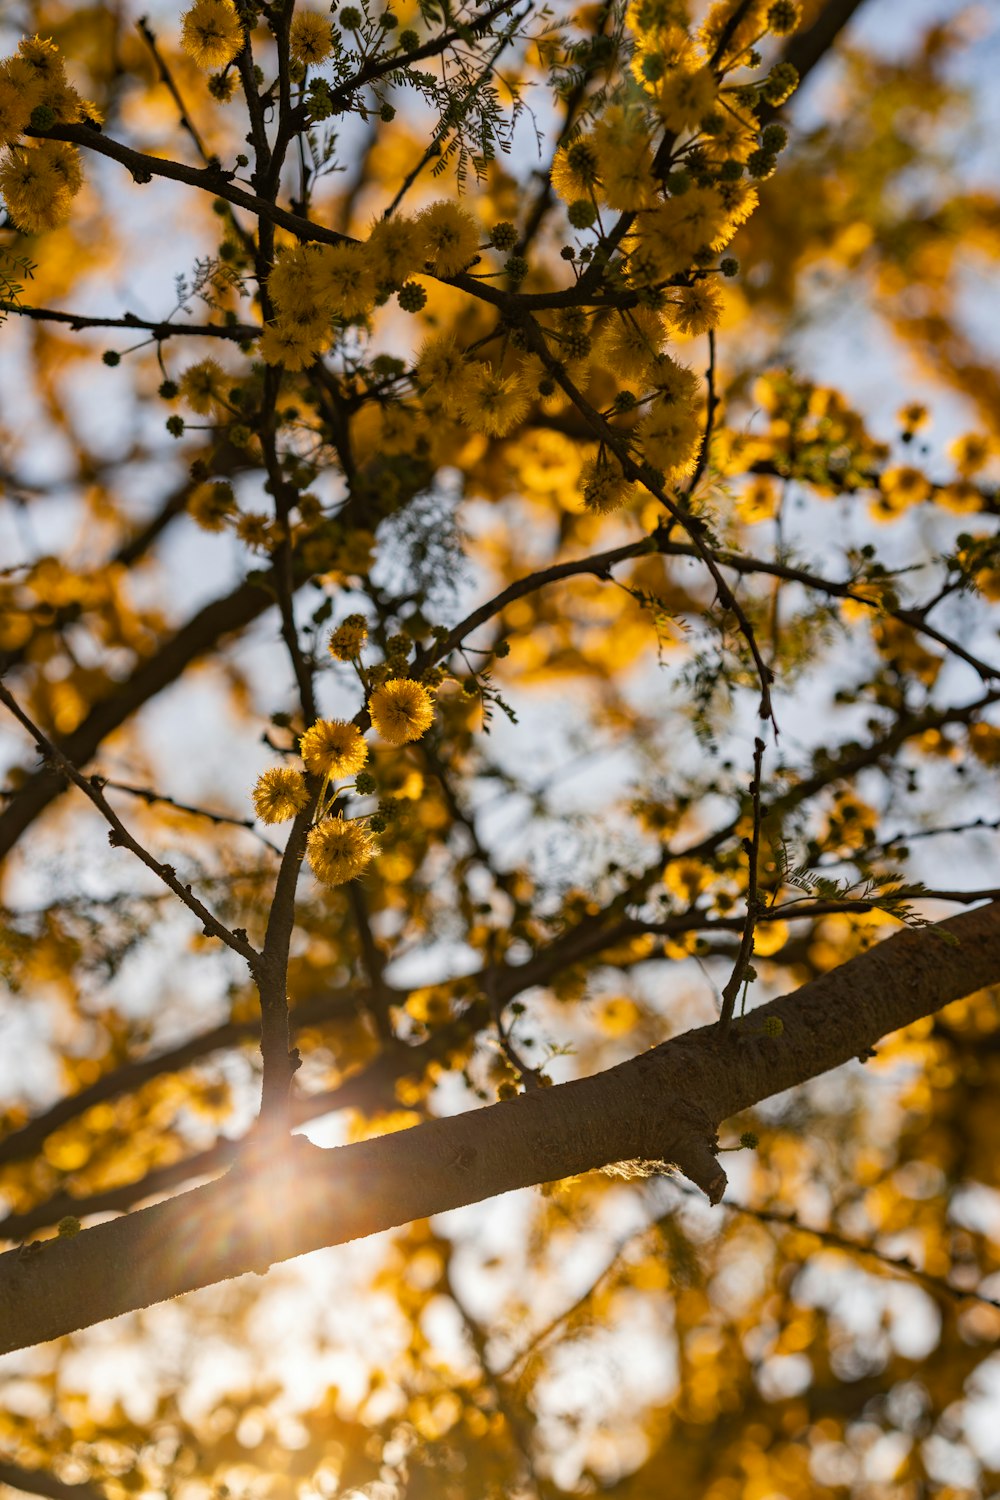 yellow flowers on brown tree branch during daytime